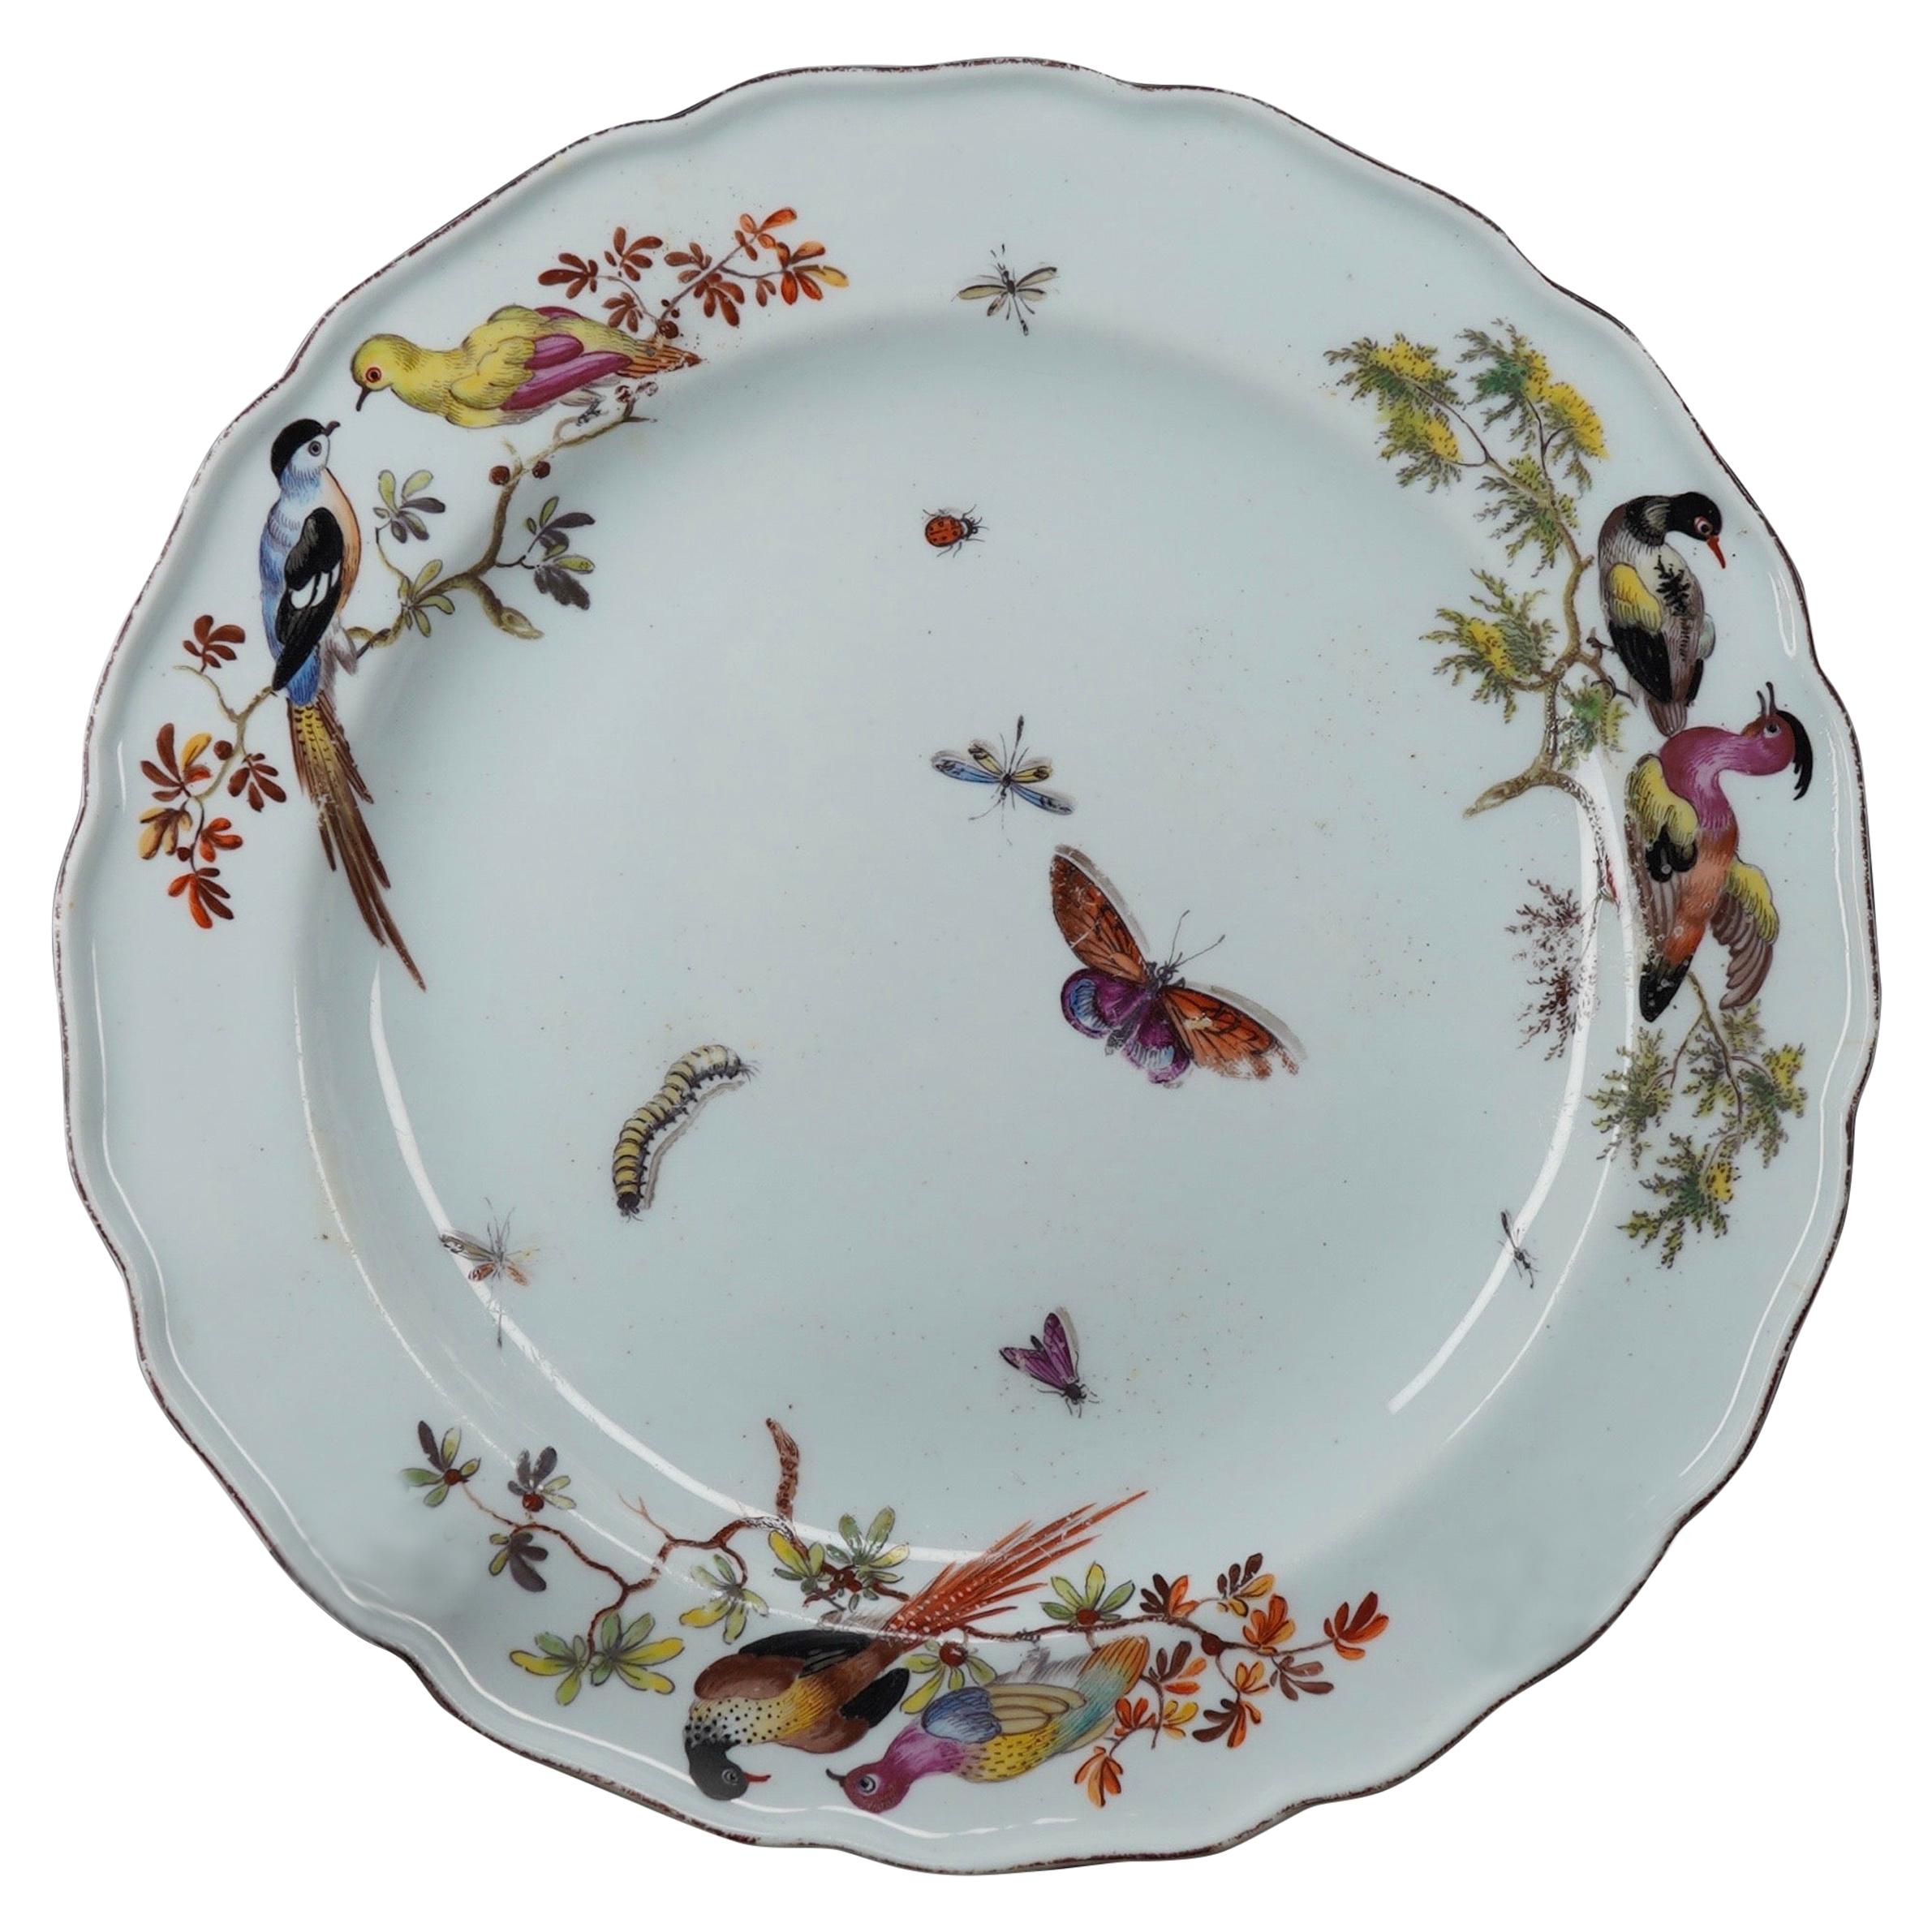 Fine Chelsea Red Anchor Plate, Birds-on-Branches and Butterflies, circa 1755